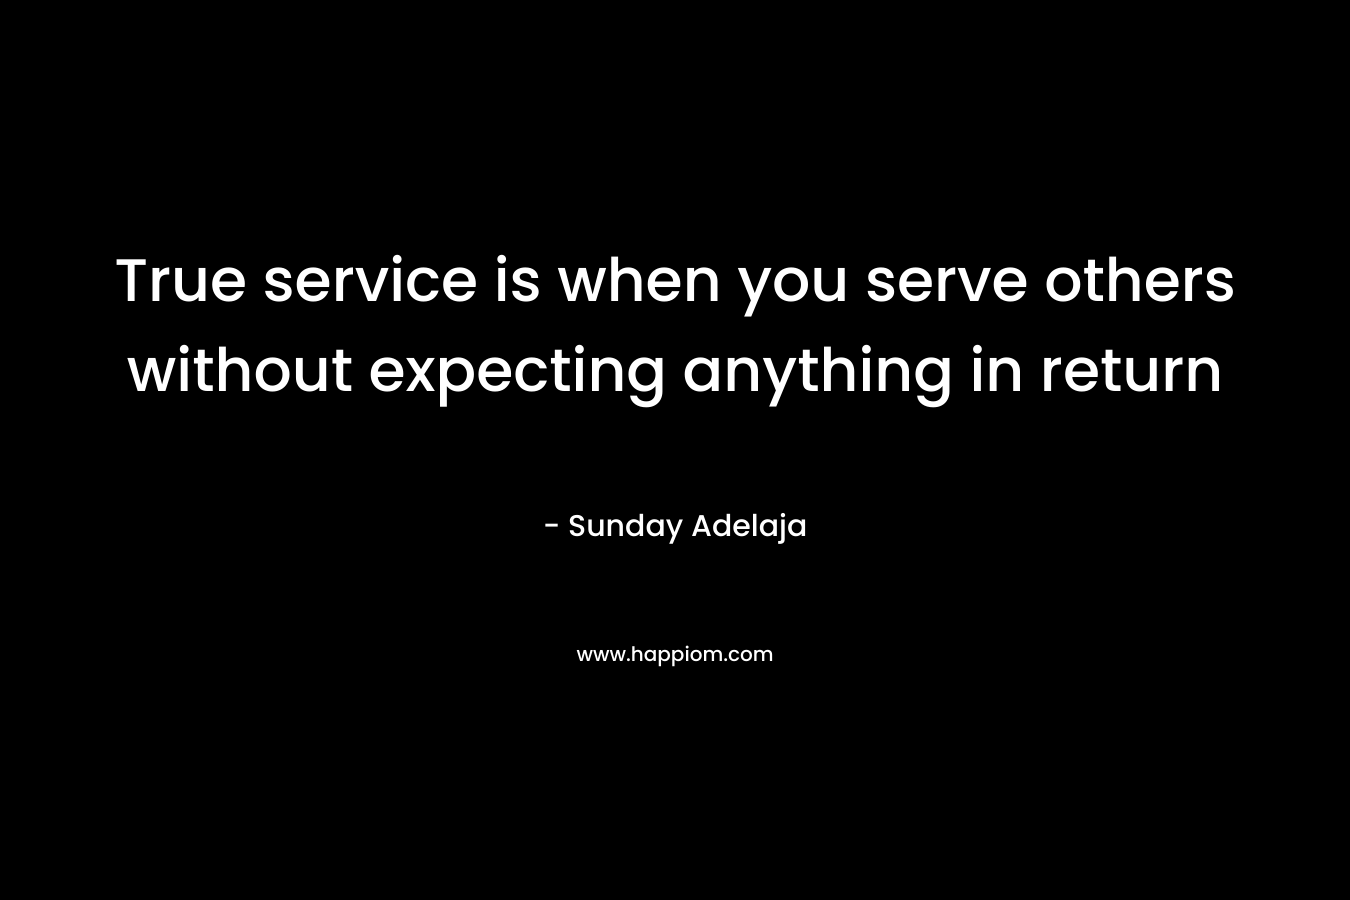 True service is when you serve others without expecting anything in return